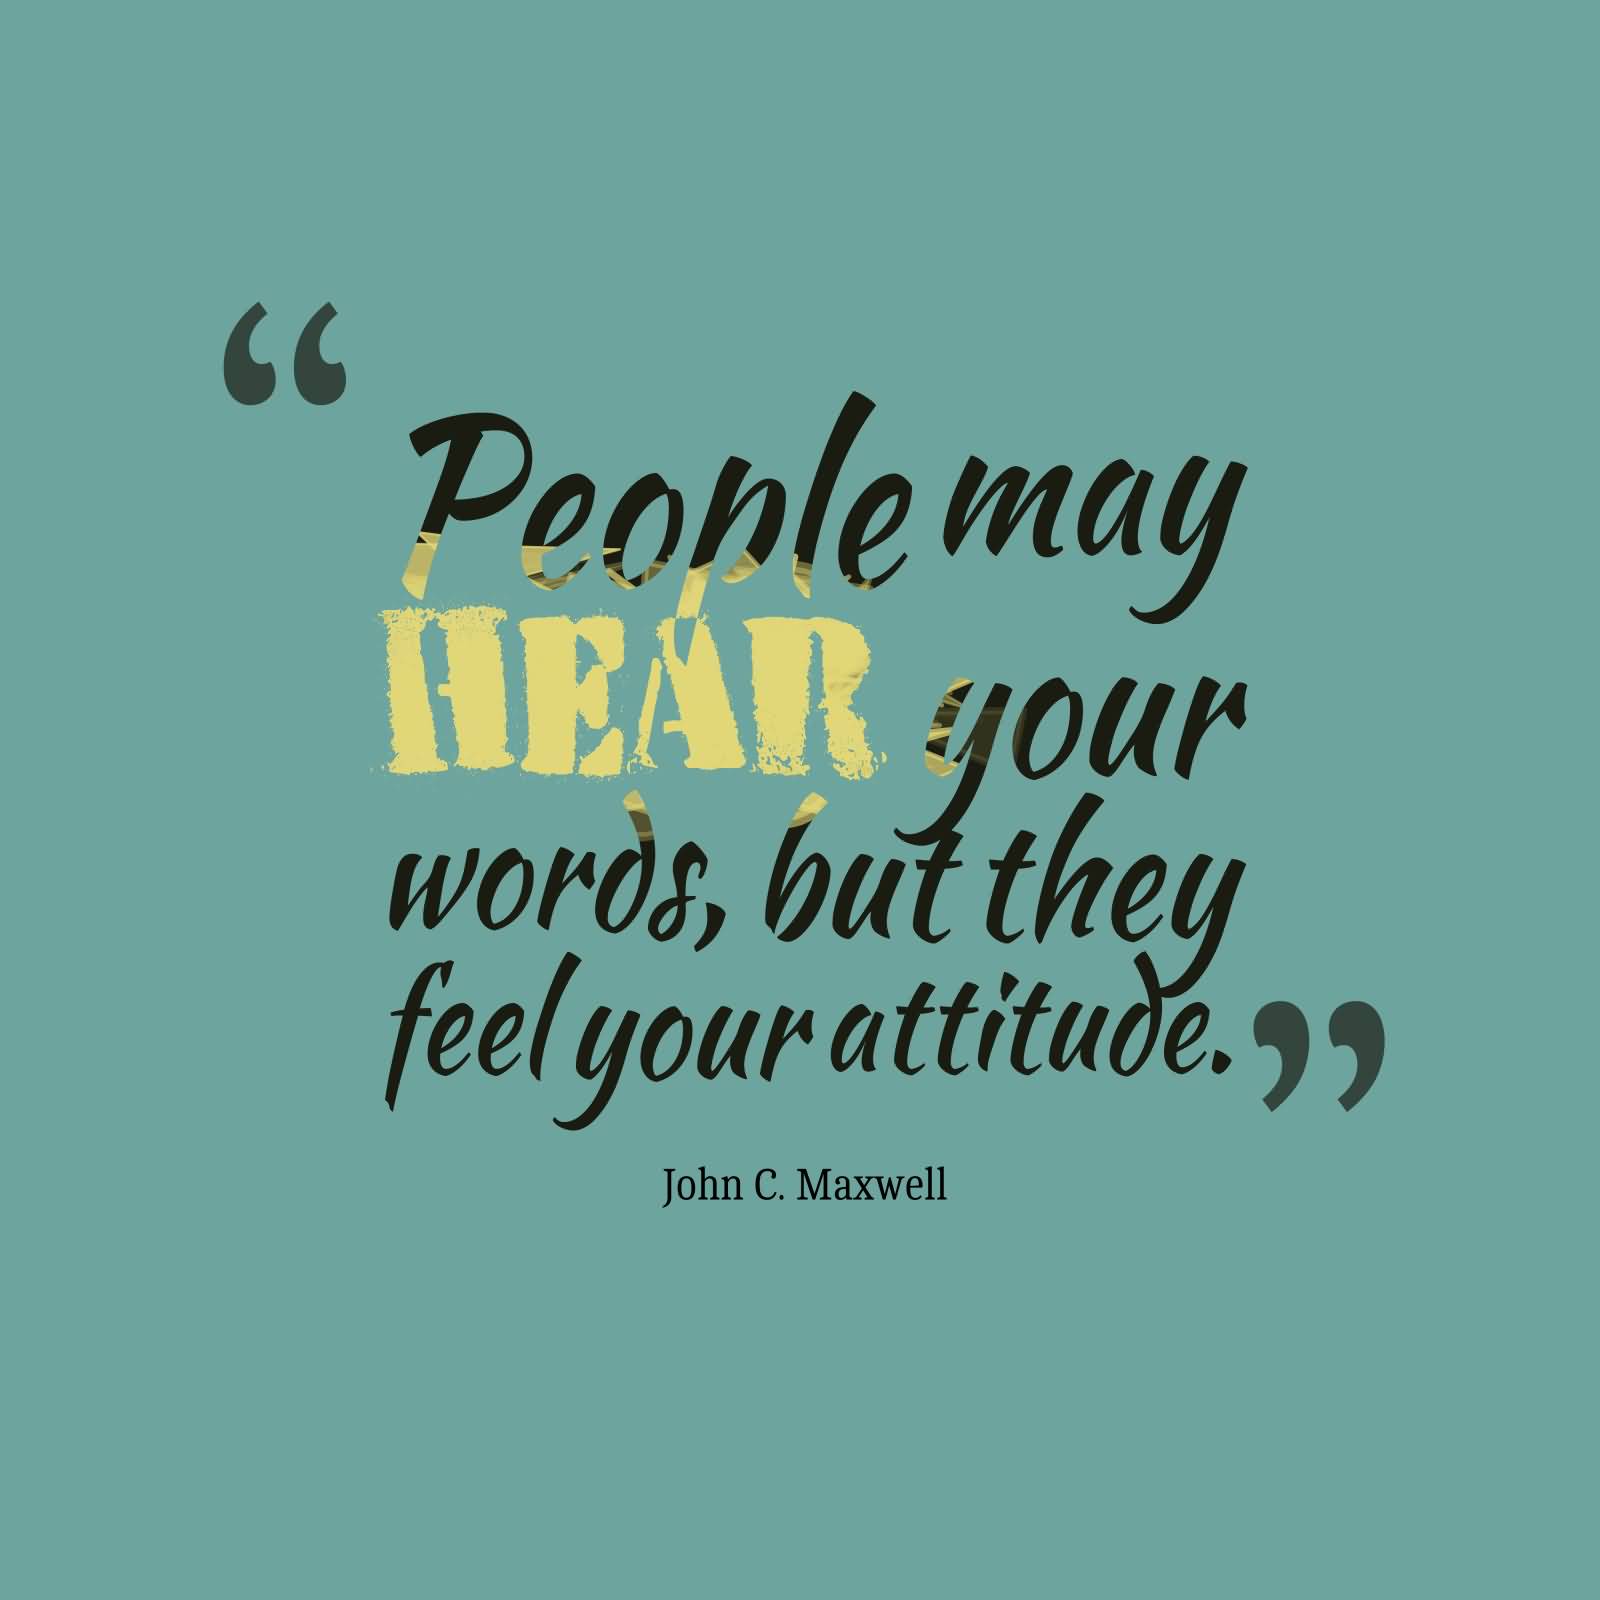 People may hear your words, but they feel your attitude. John C. Maxwell